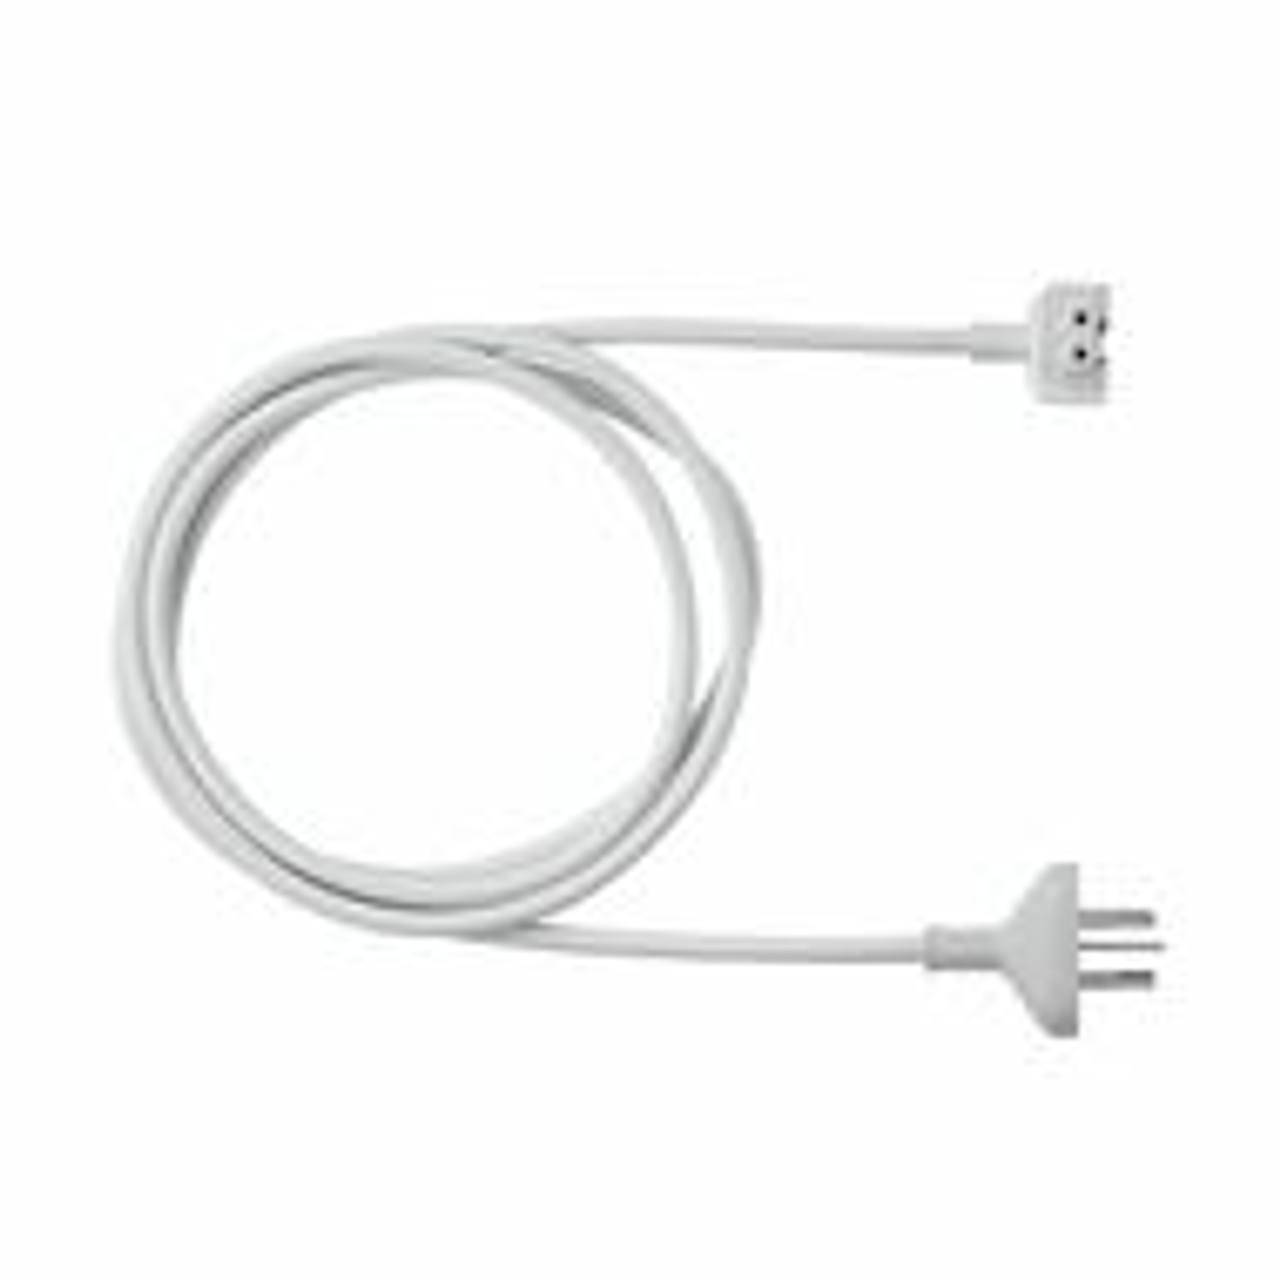 Apple 60W Power Adapter for MacBook Pro 13" MagSafe 2 (T tip) (A1435)